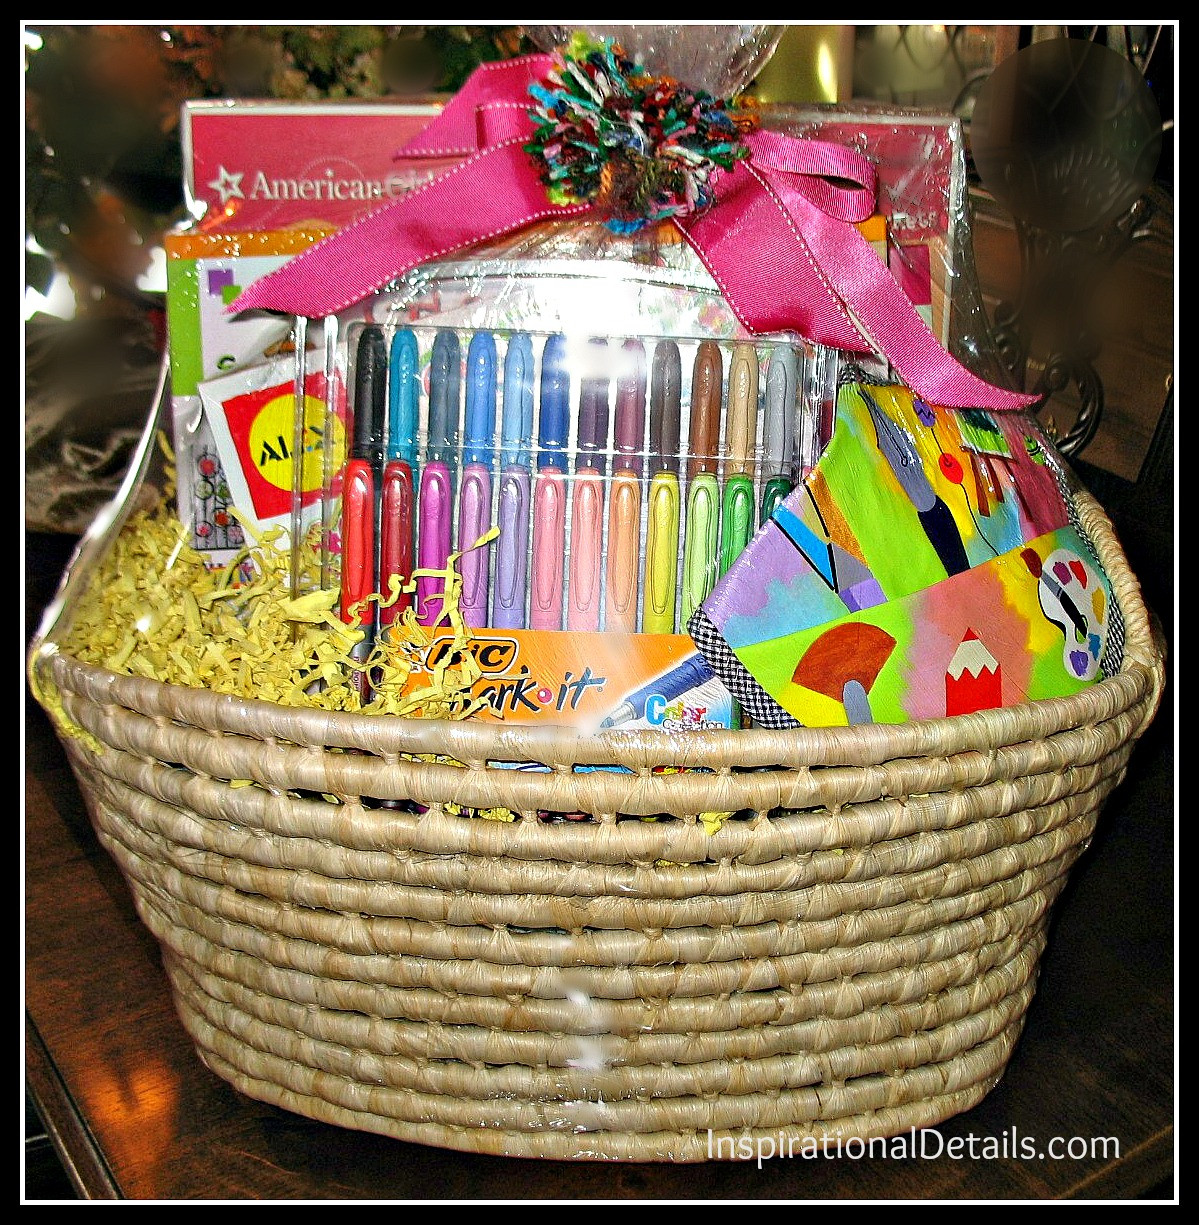 Auction Gift Basket Ideas
 Auction and Basket Item Ideas – Kids’ Always a Hit